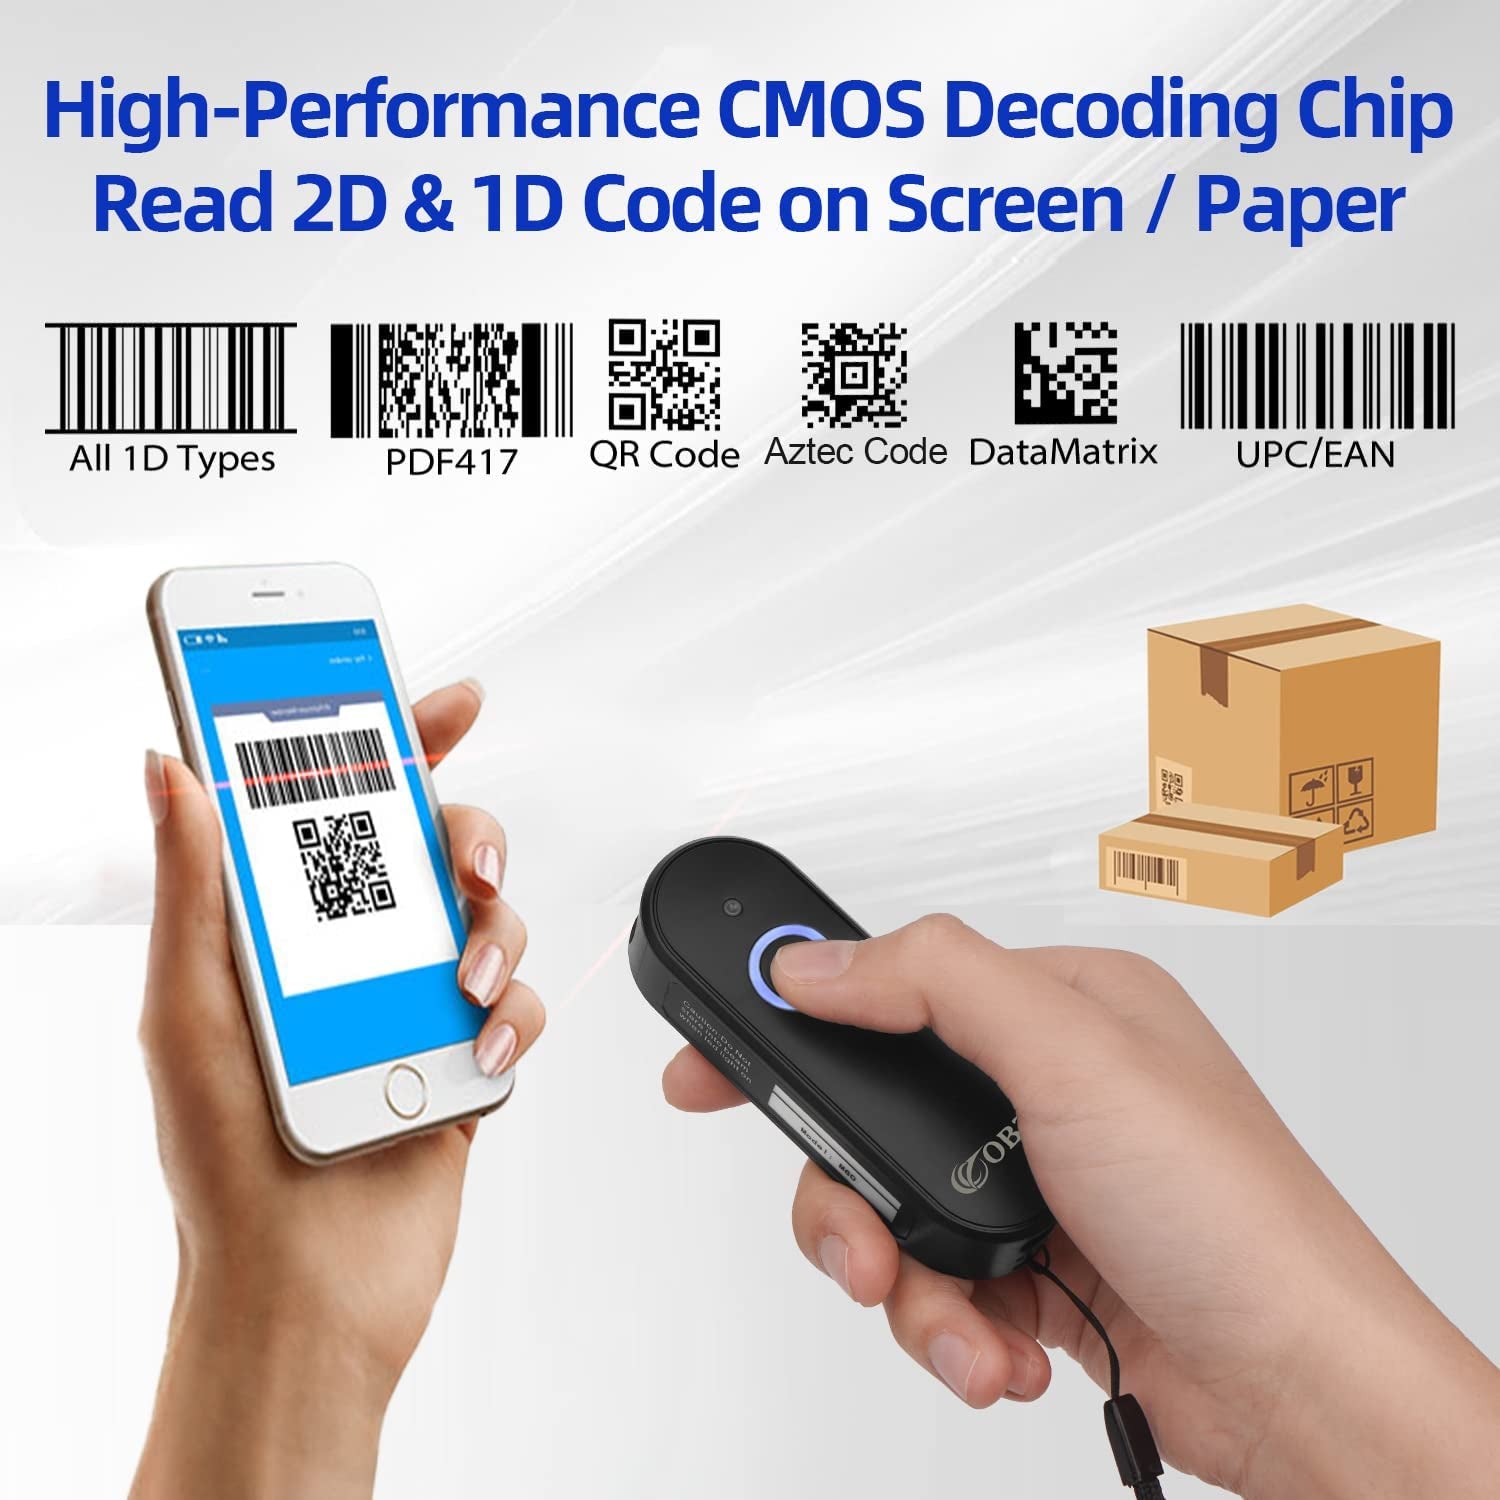 Portable Mini 2D Wireless Barcode Scanner - 2.4G & Bluetooth Connectivity for iOS, Android, Windows PC - Ideal for Store, Warehouse, Inventory, and Library Management